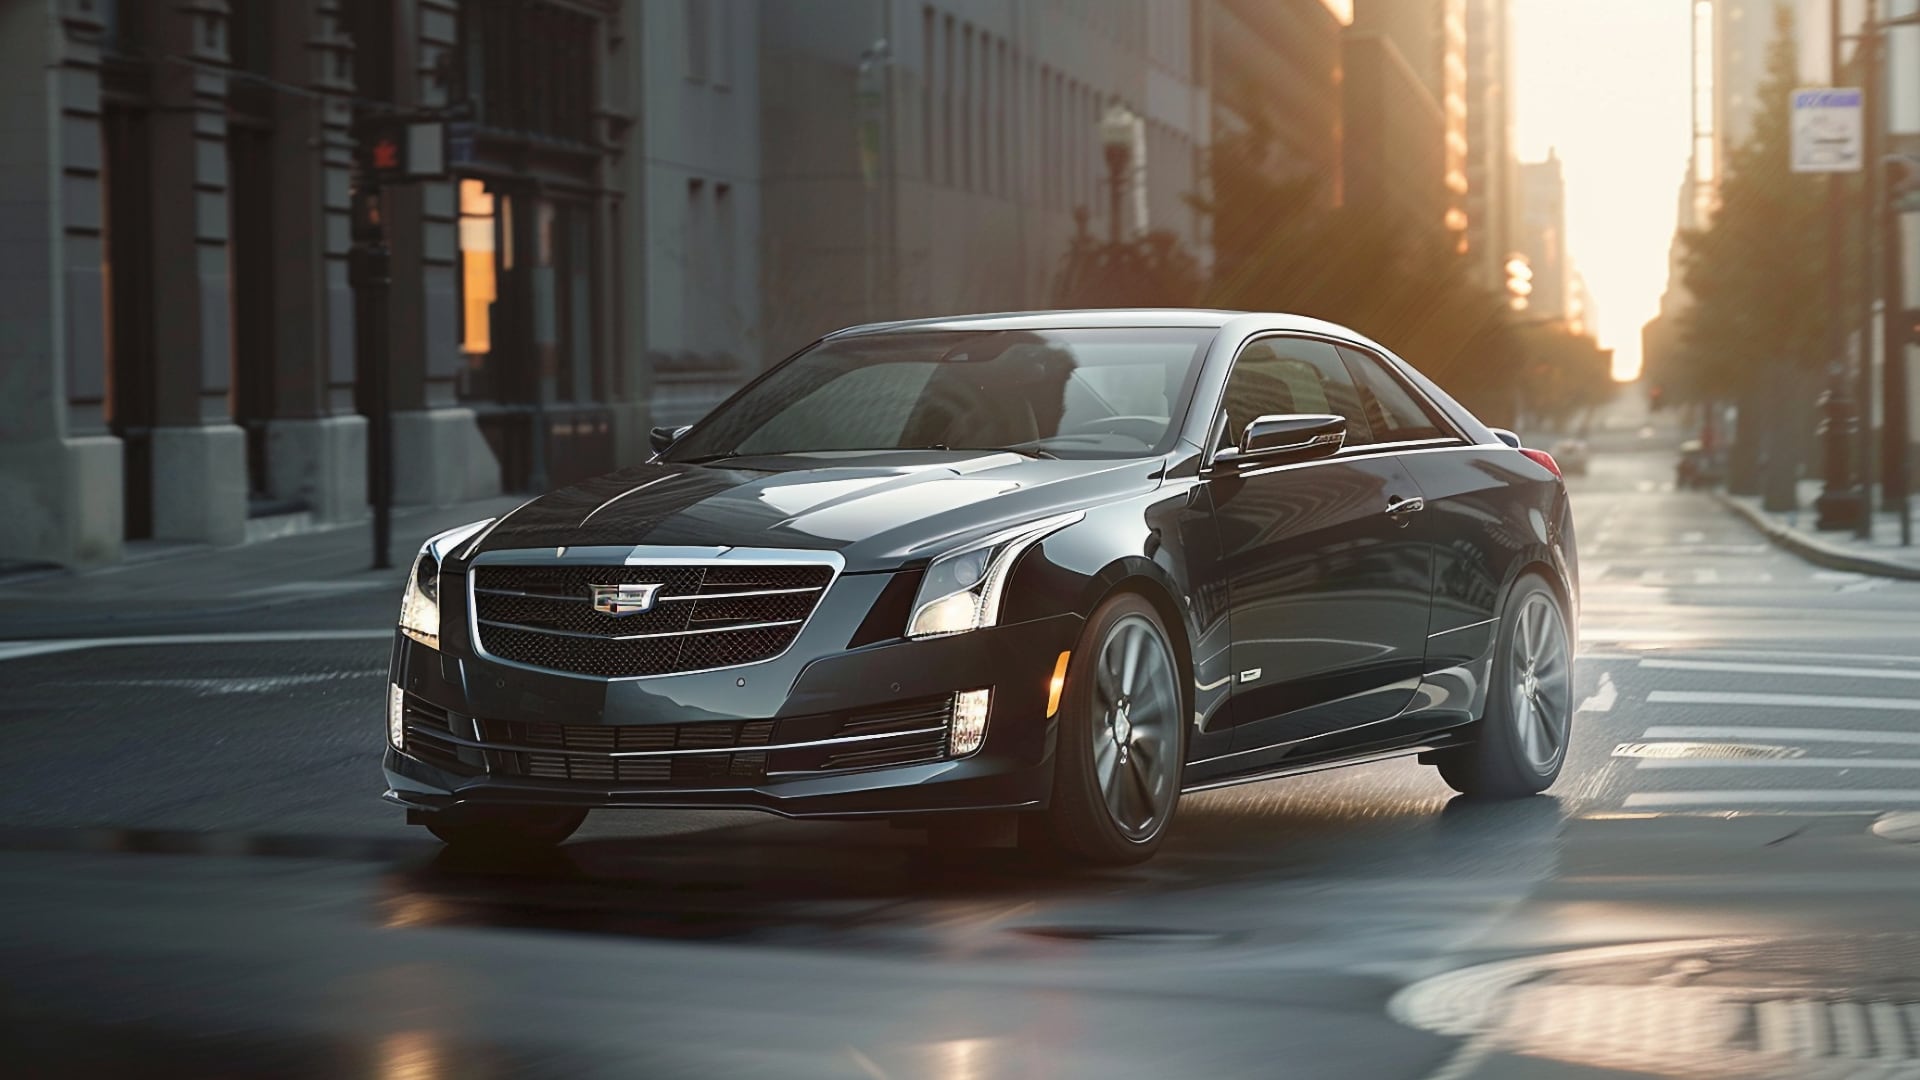 The 2018 Cadillac ATS, one of the years to avoid, is driving down a city street.